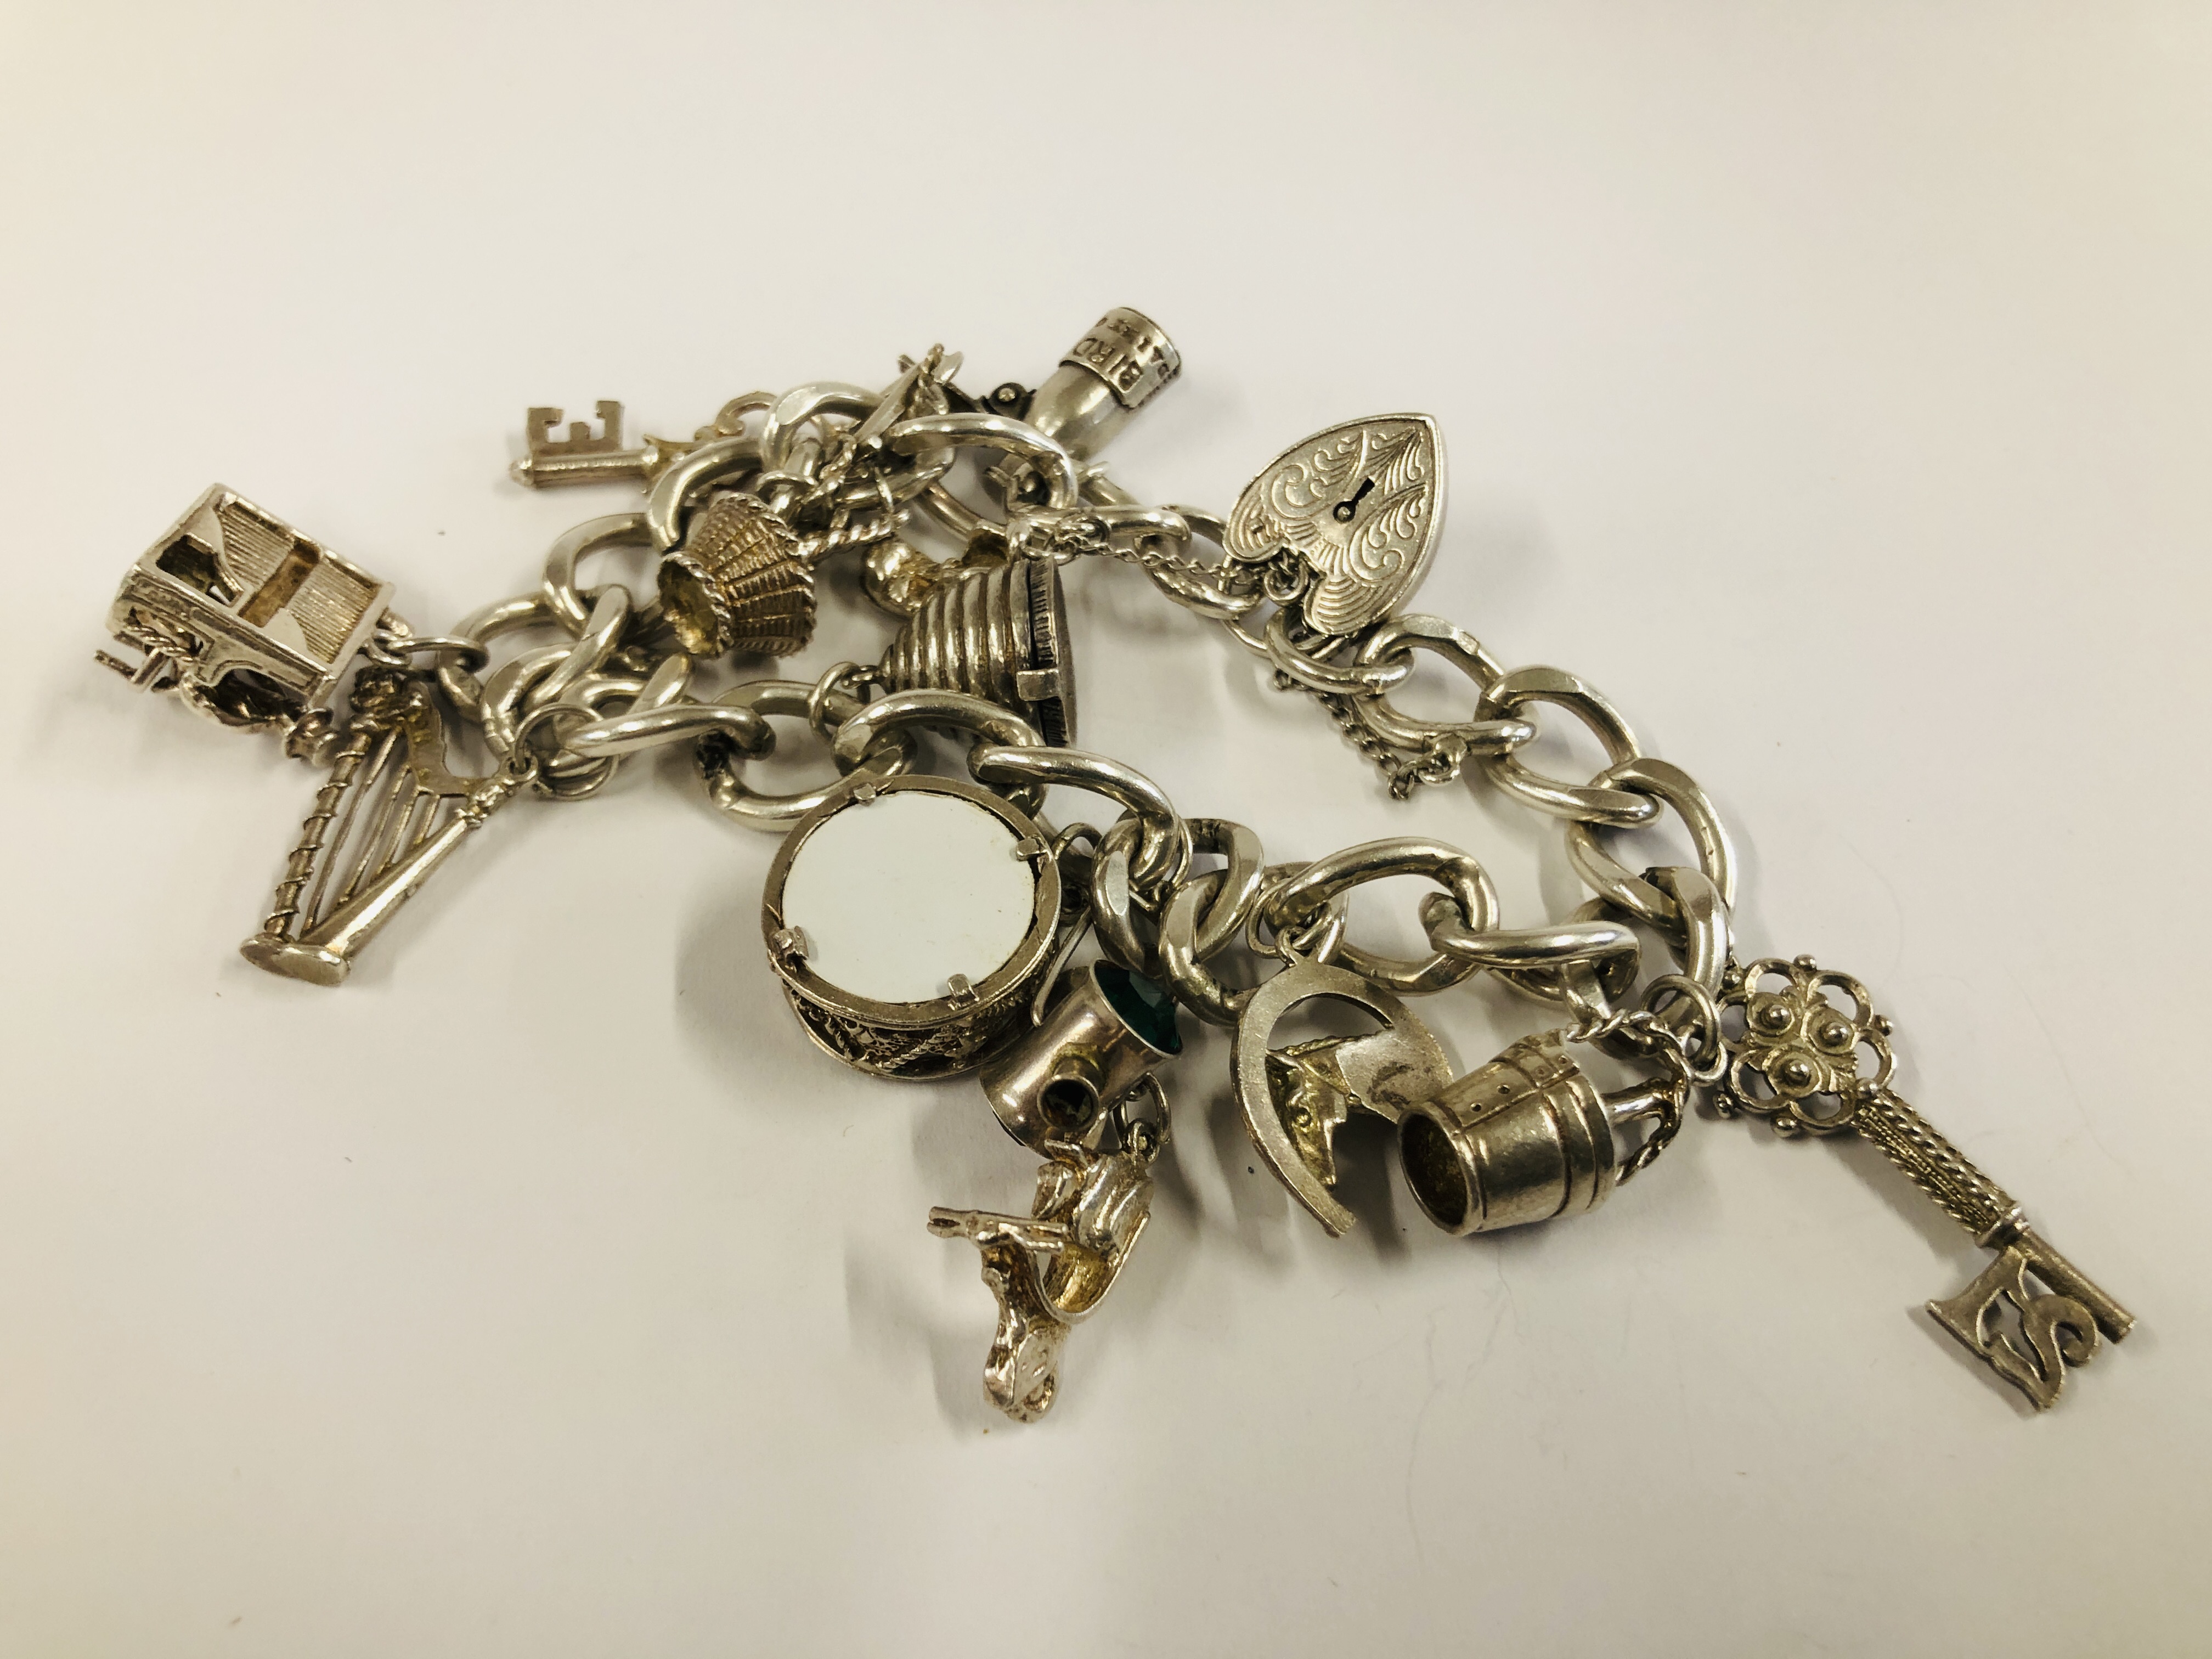 SILVER CHARM BRACELET WITH 13 CHARMS ATTACHED. - Image 6 of 6